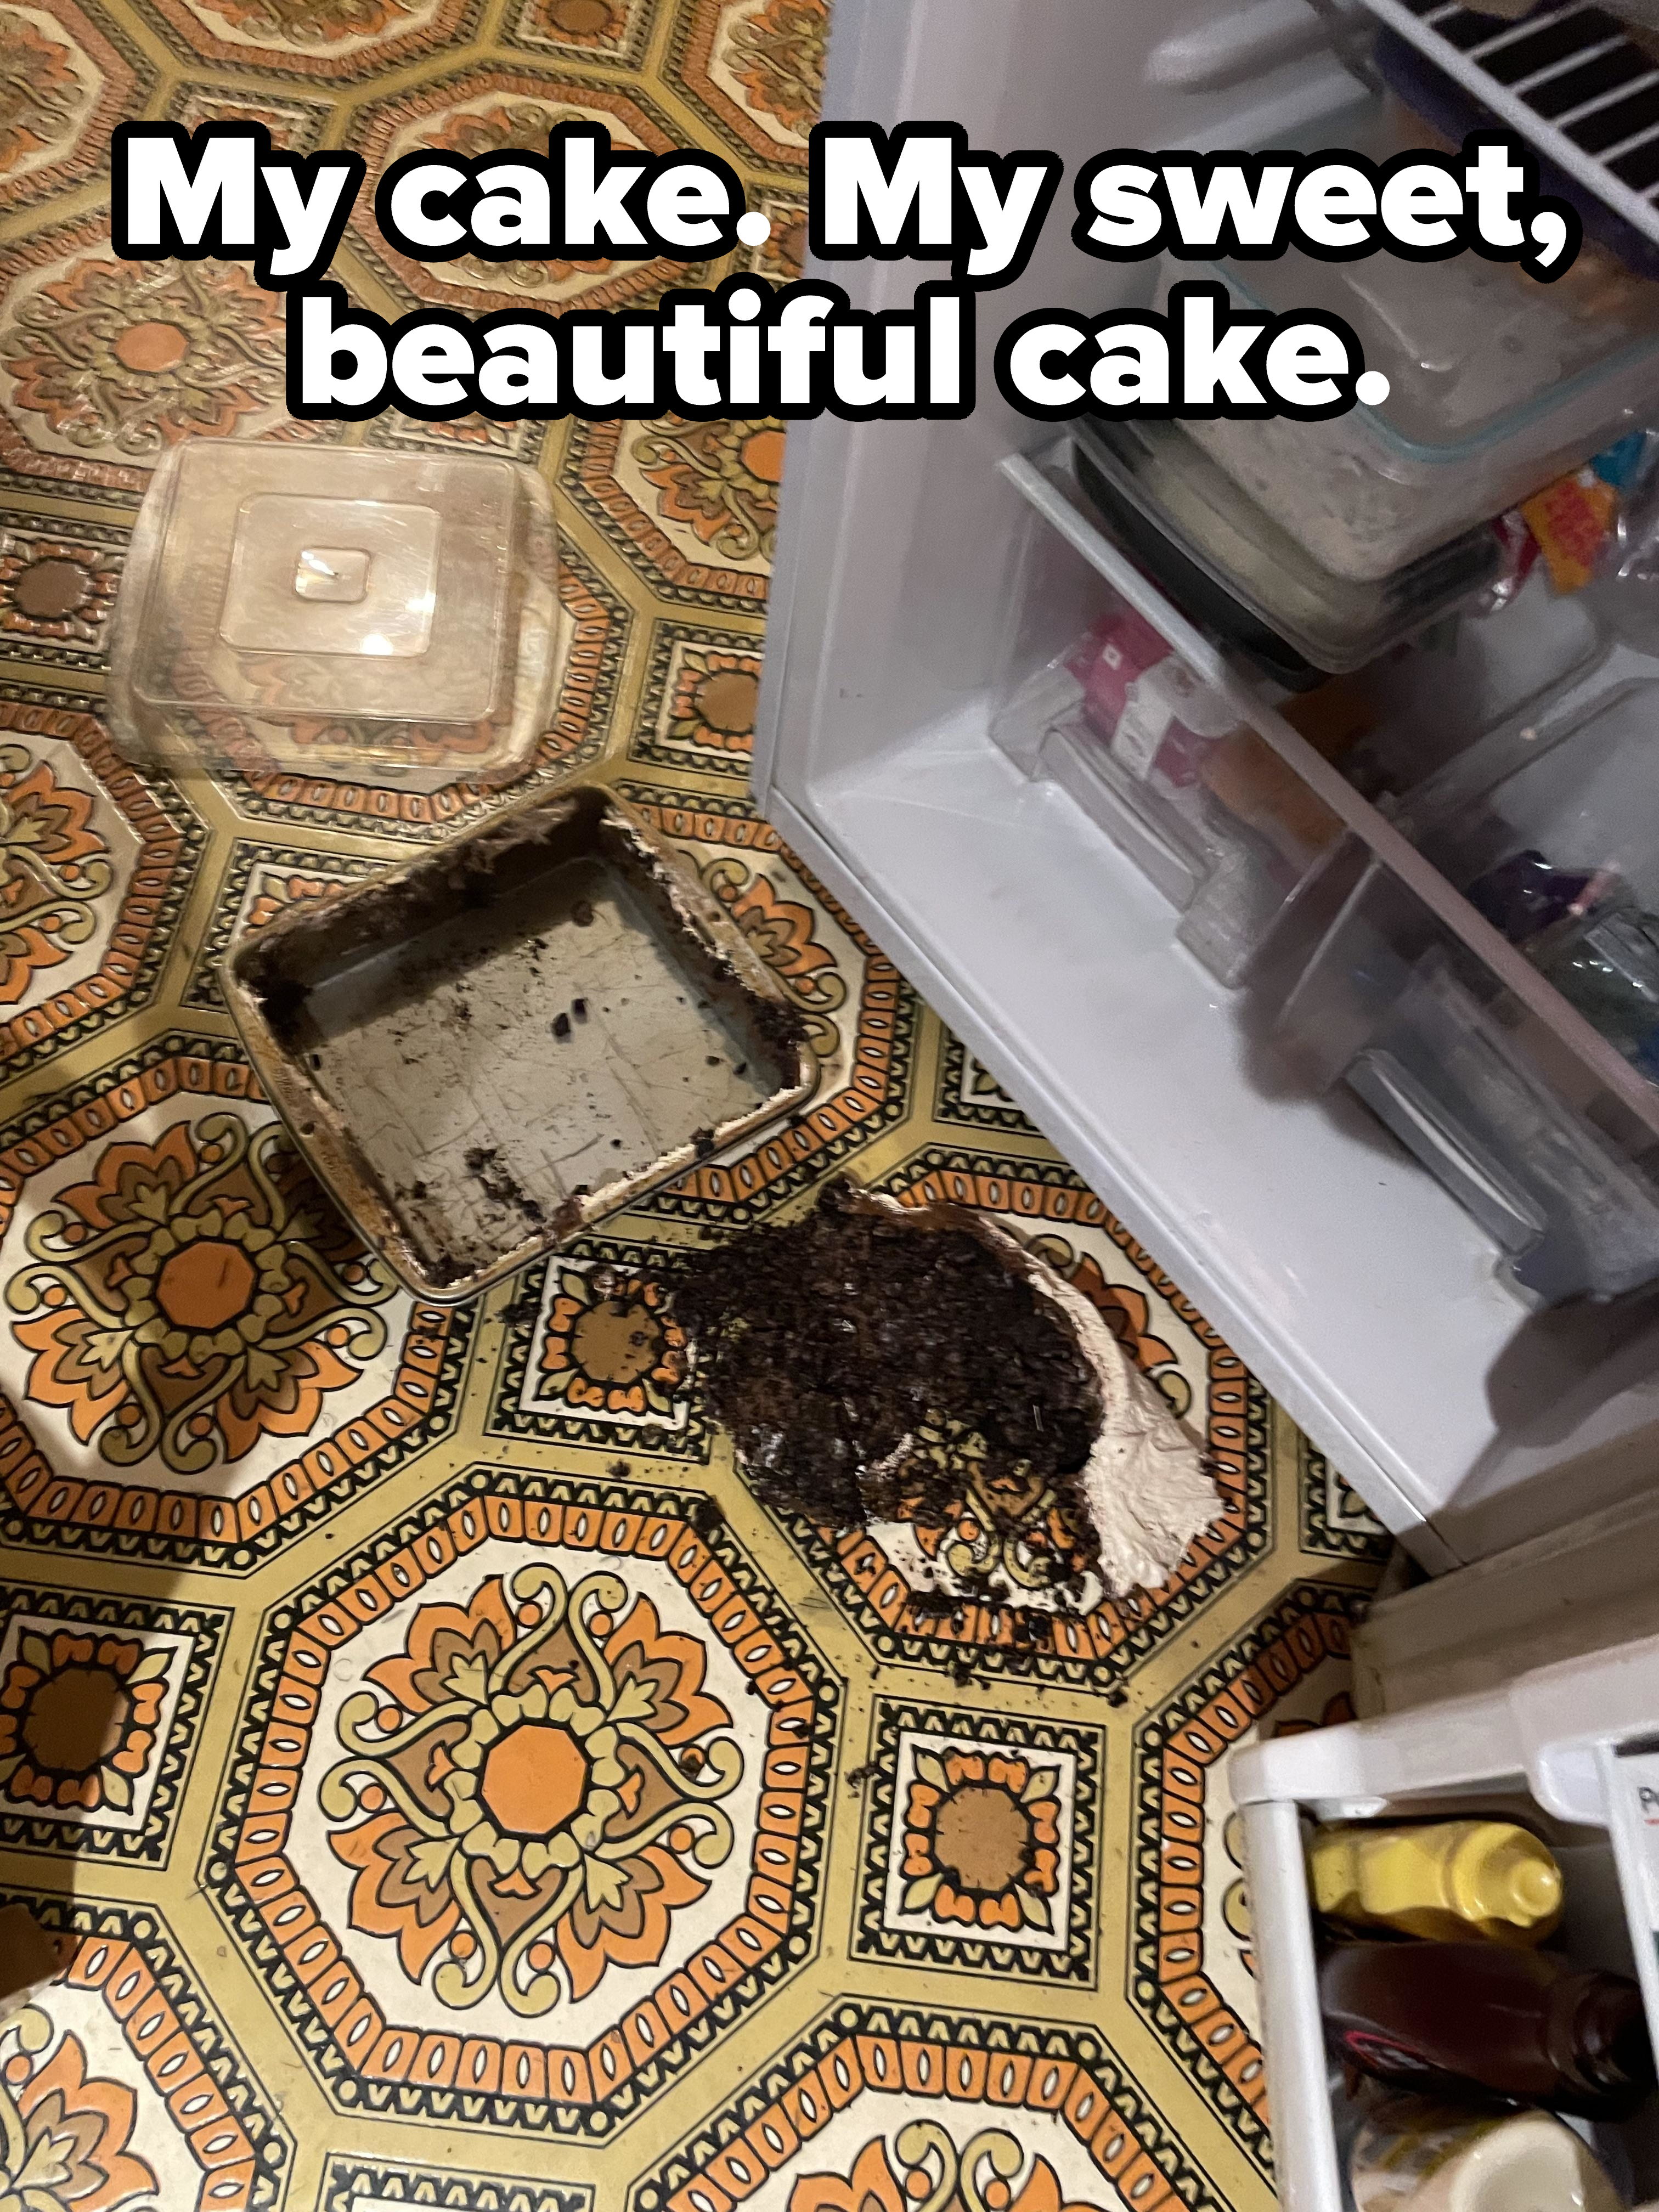 Overturned cake pan with cake scattered on a patterned floor, next to an open refrigerator with items inside